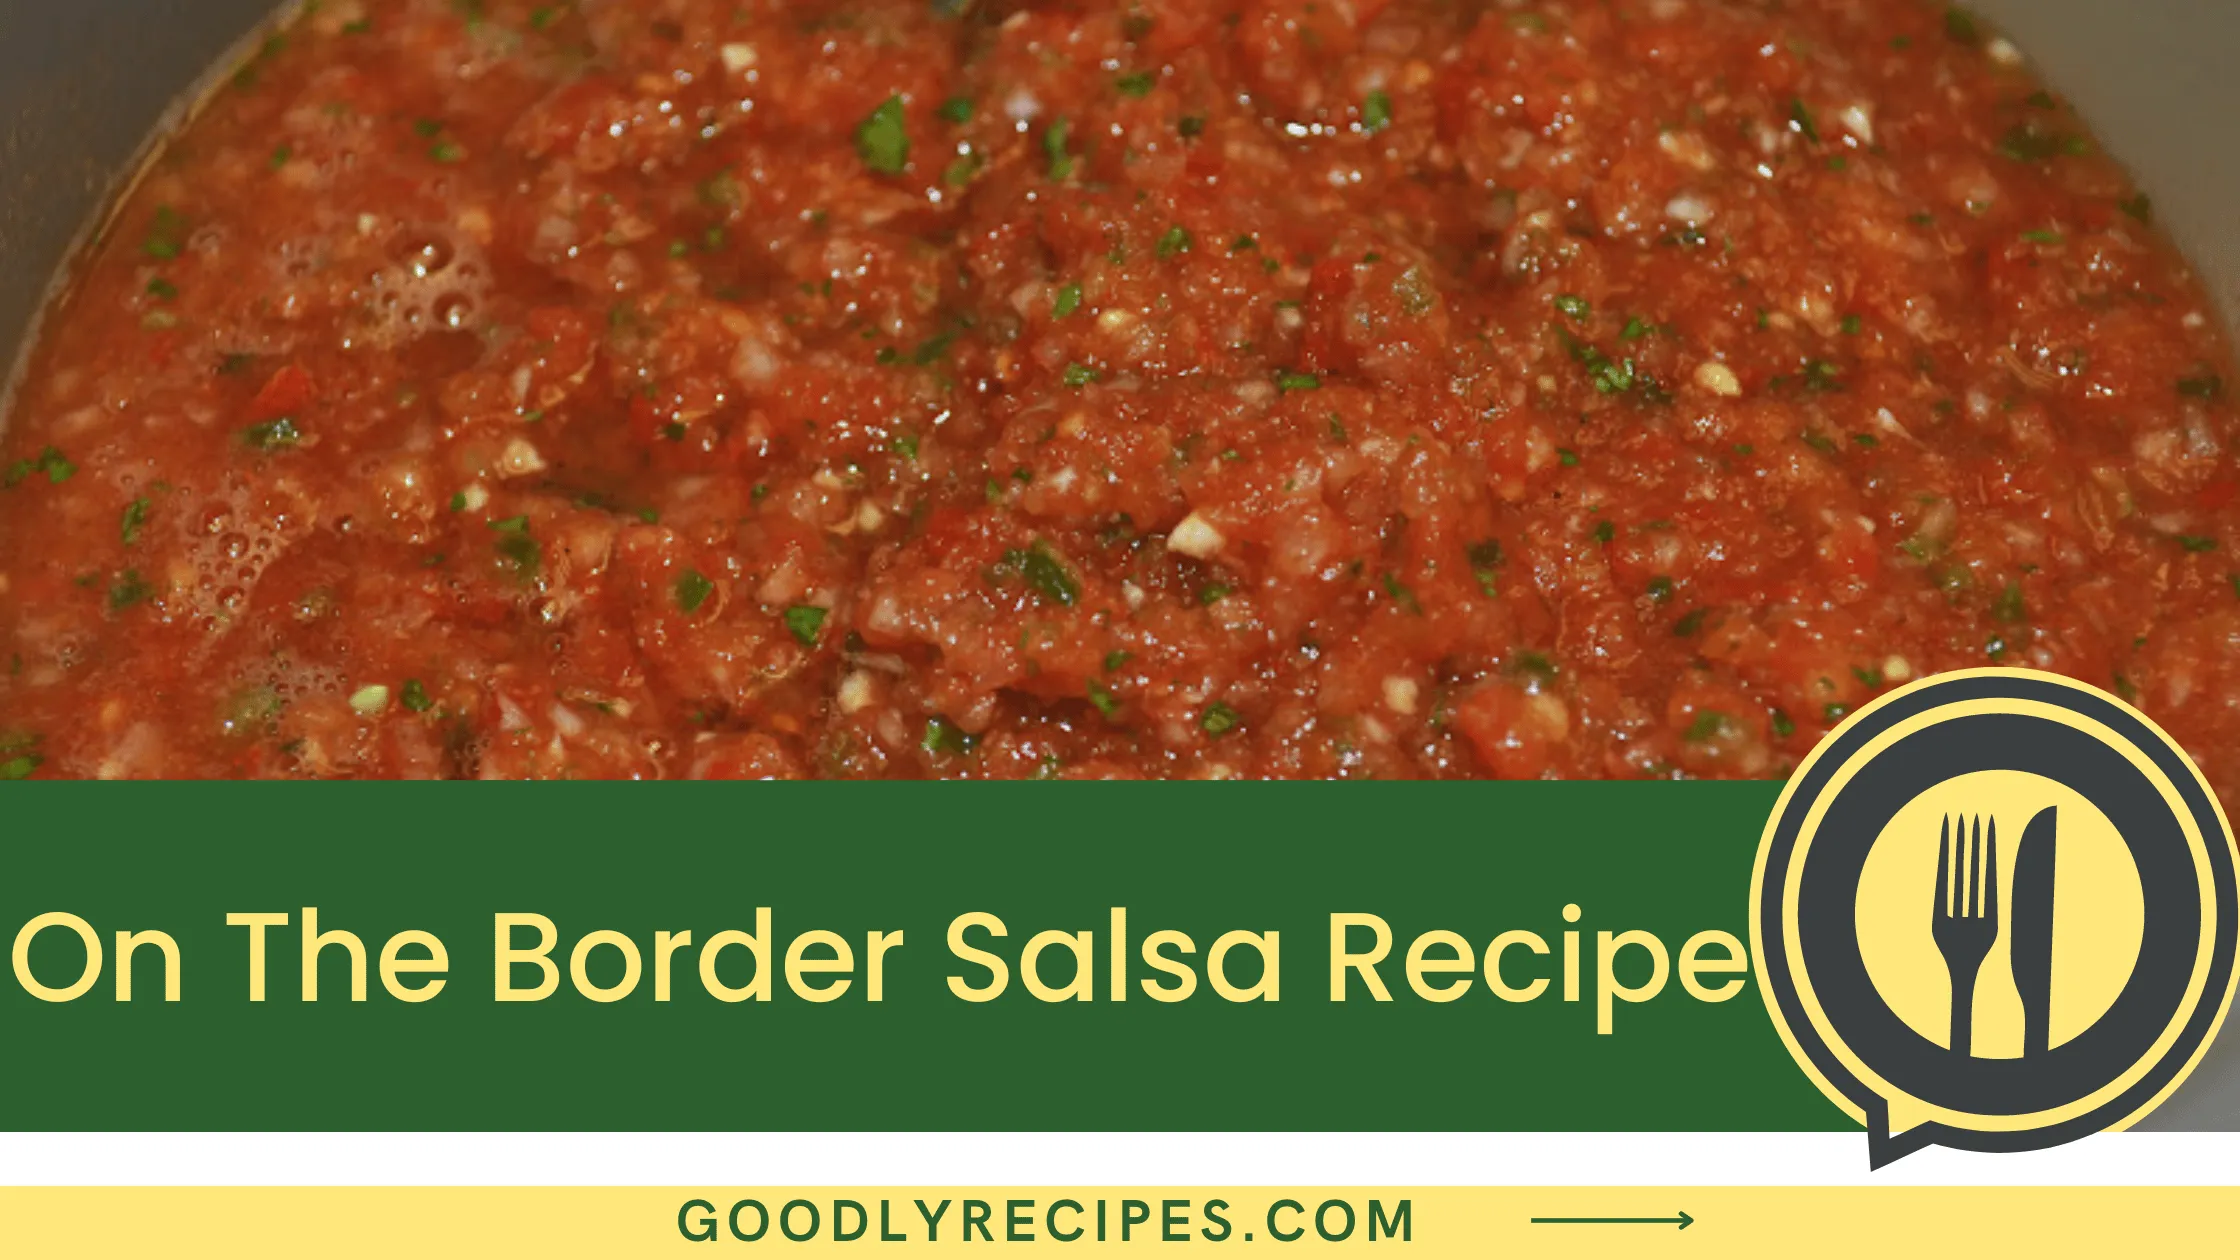 On The Border Salsa Recipe - For Food Lovers